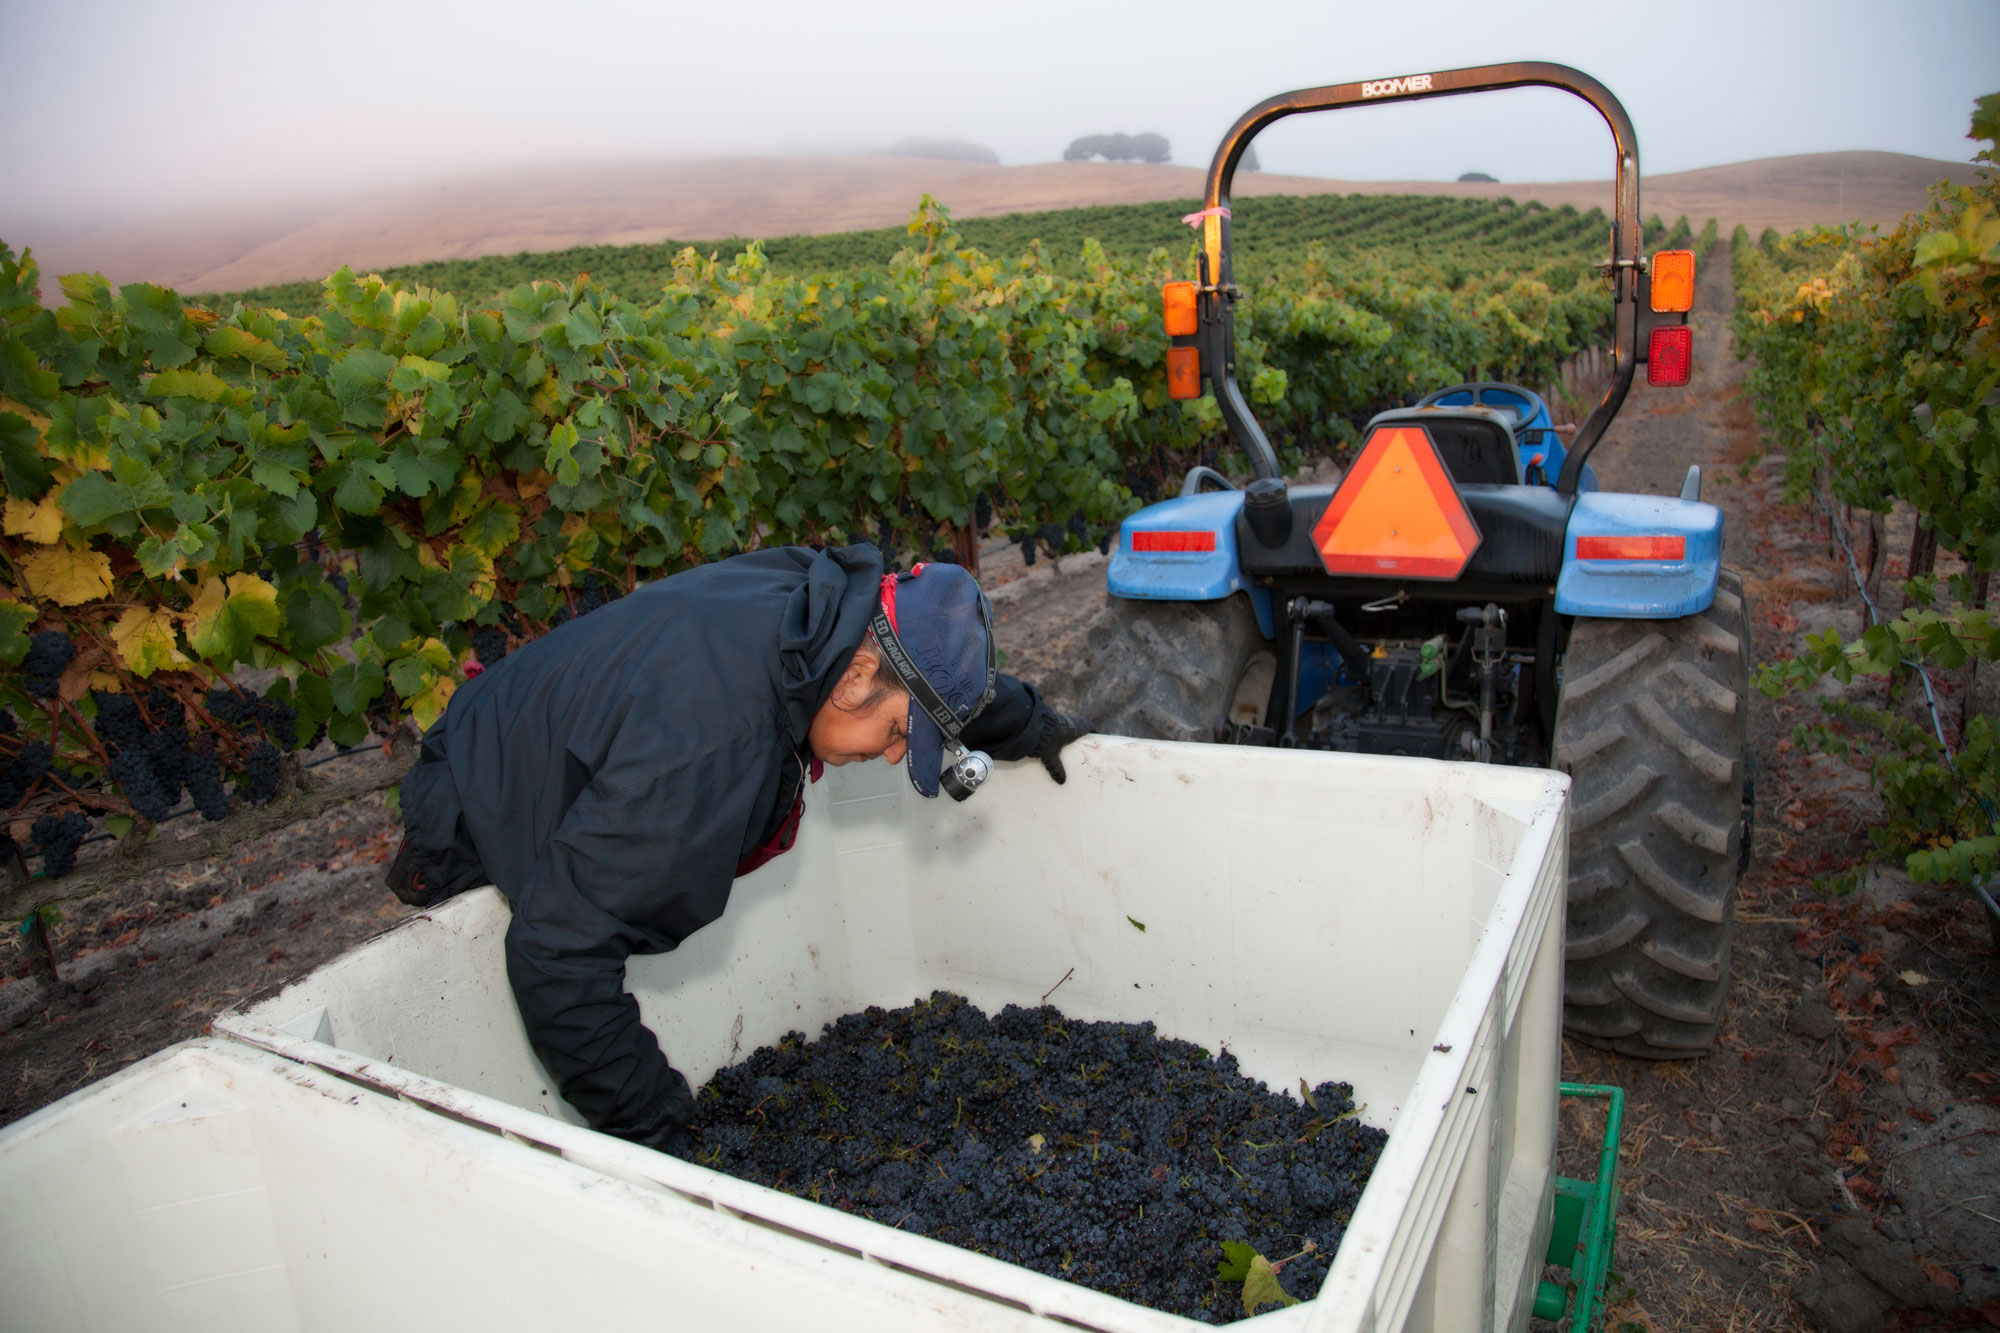 Placing harvested grapes into container